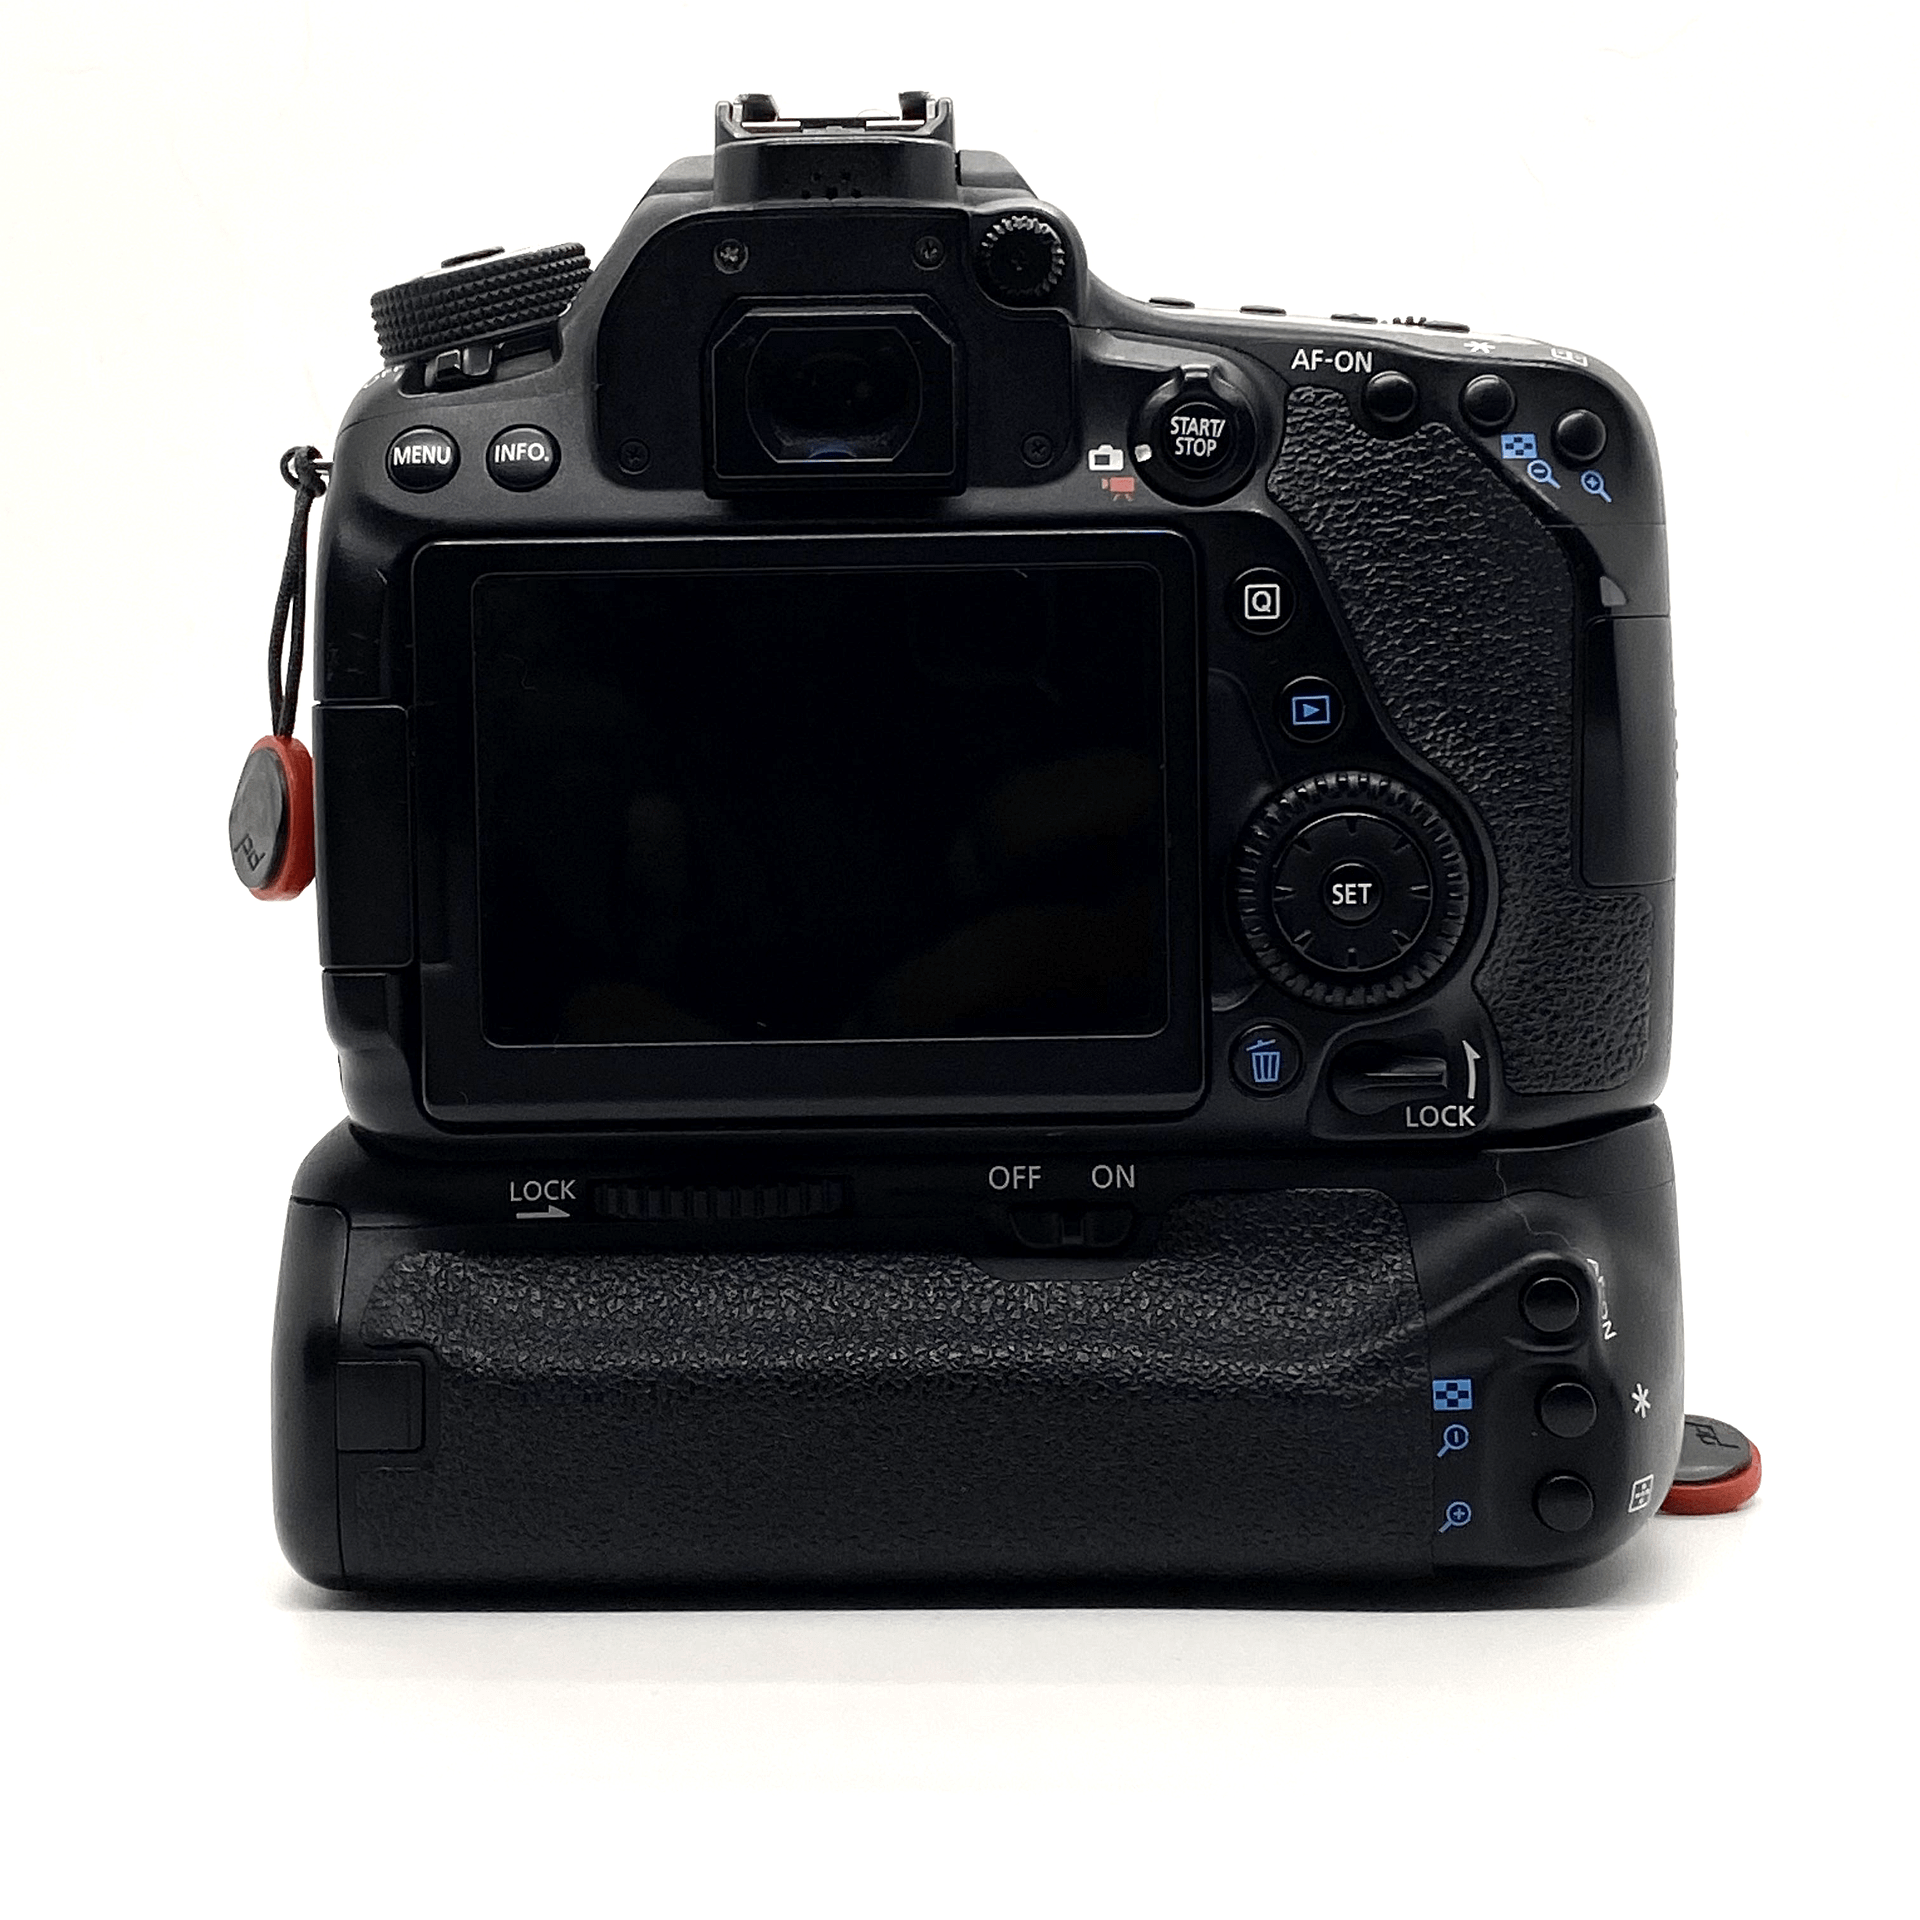 angle 2 showing the Canon 80D for Review